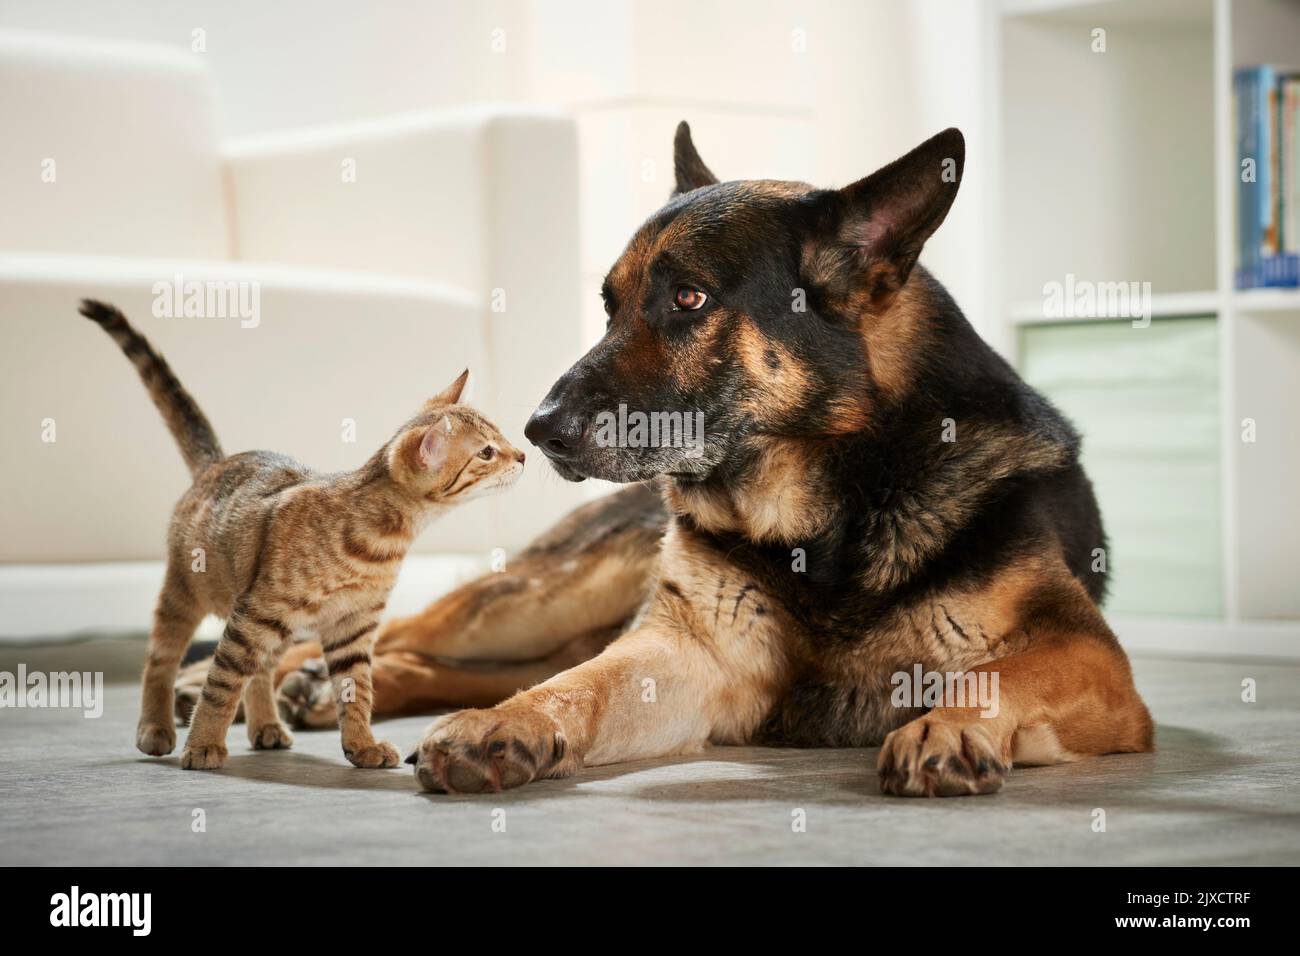 Domestic cat. Tabby kitten and adult German Shepherd dog sniffing each other. Germany Stock Photo